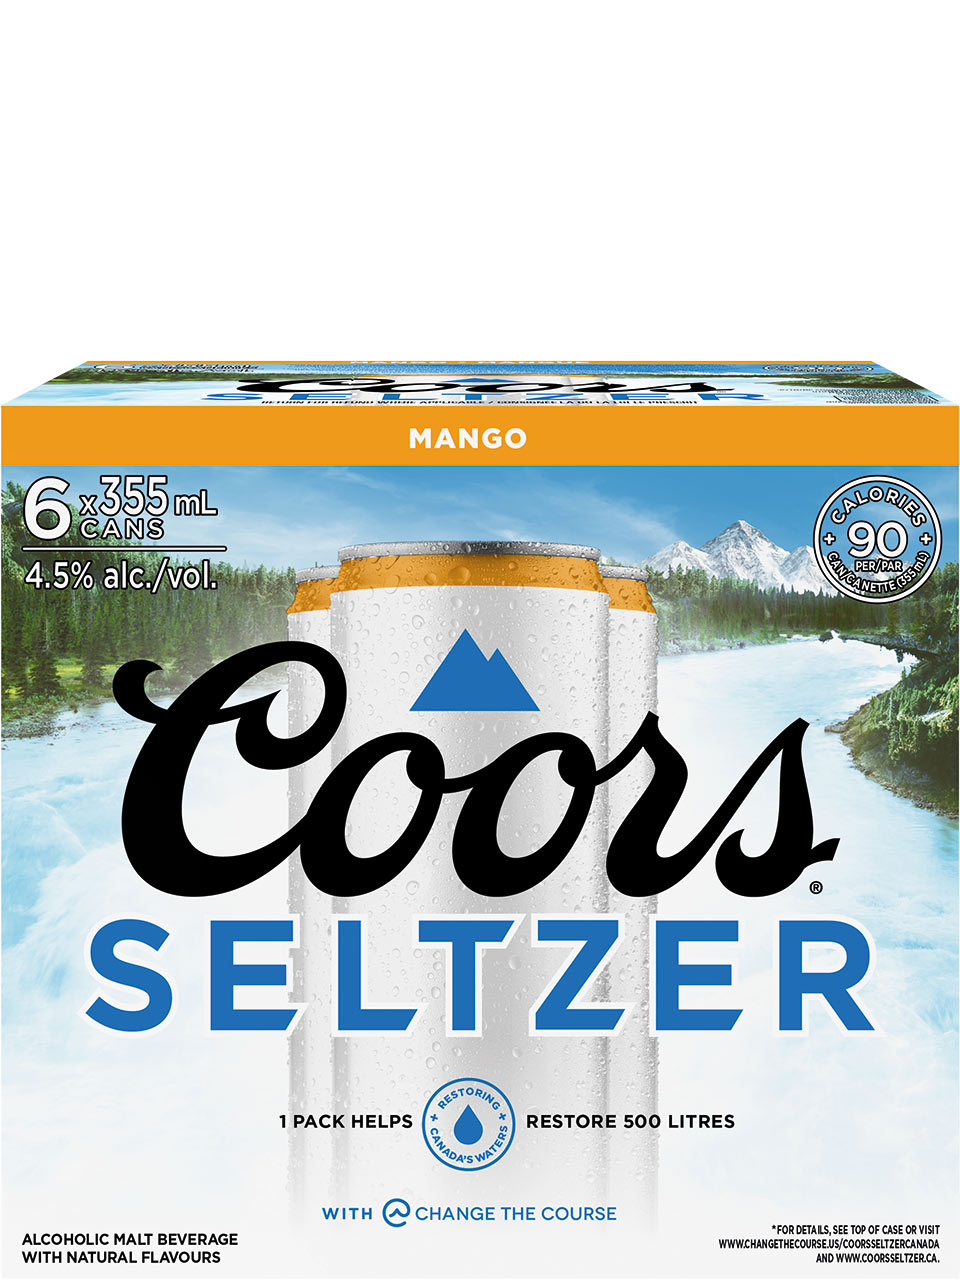 Coors Seltzer Mango 6 Pack Cans